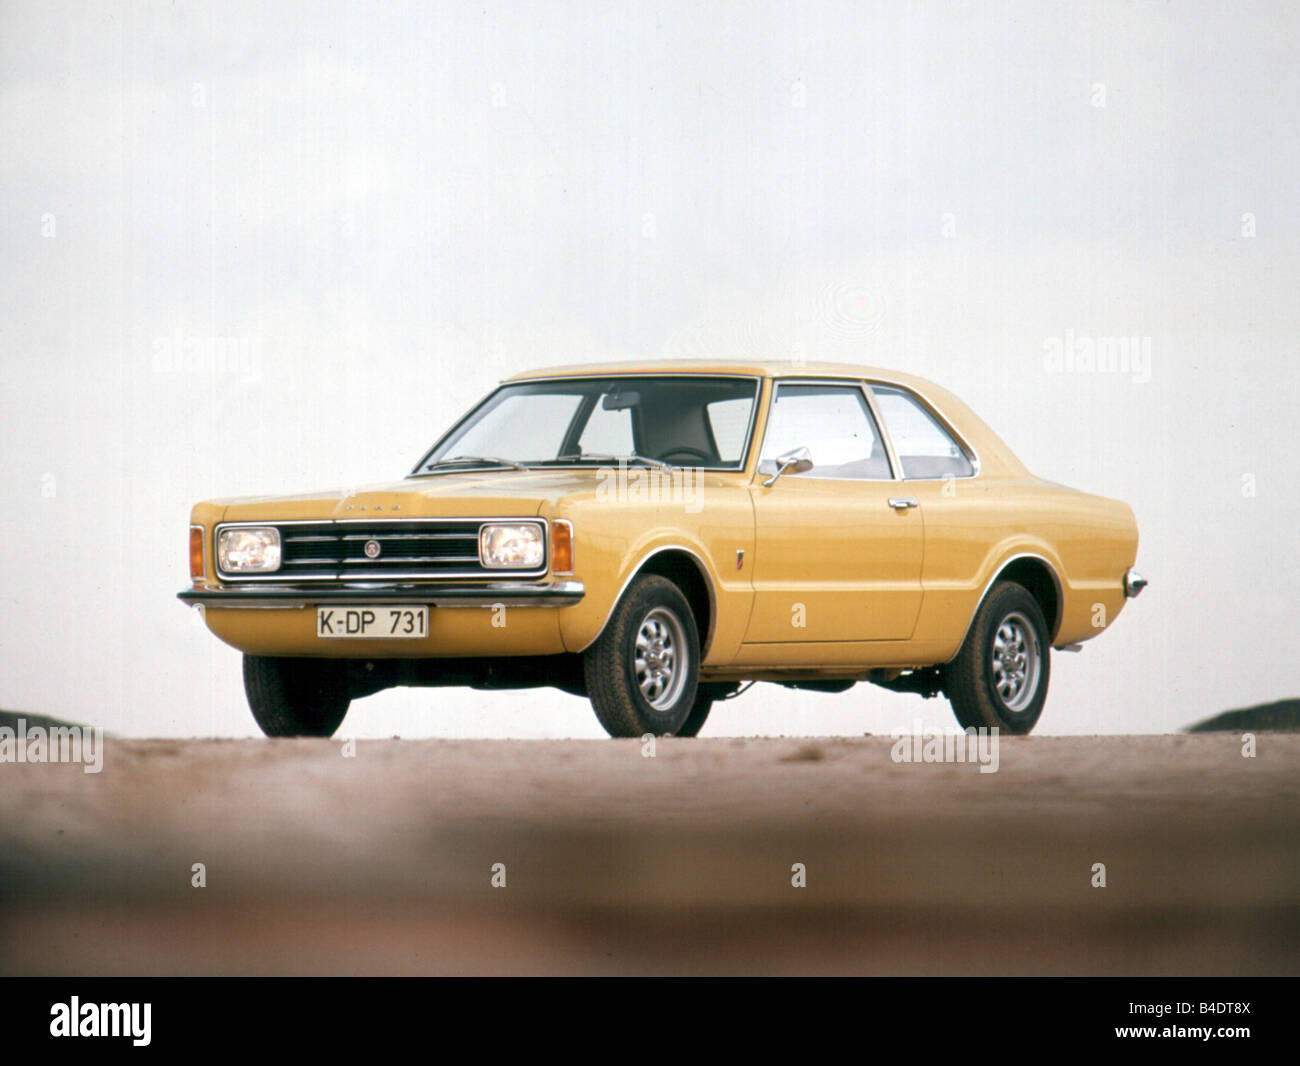 Car, Ford Taunus, yellow, model year 1973, The 70s, Limousine, standing, upholding, diagonal from the front, Front view Stock Photo